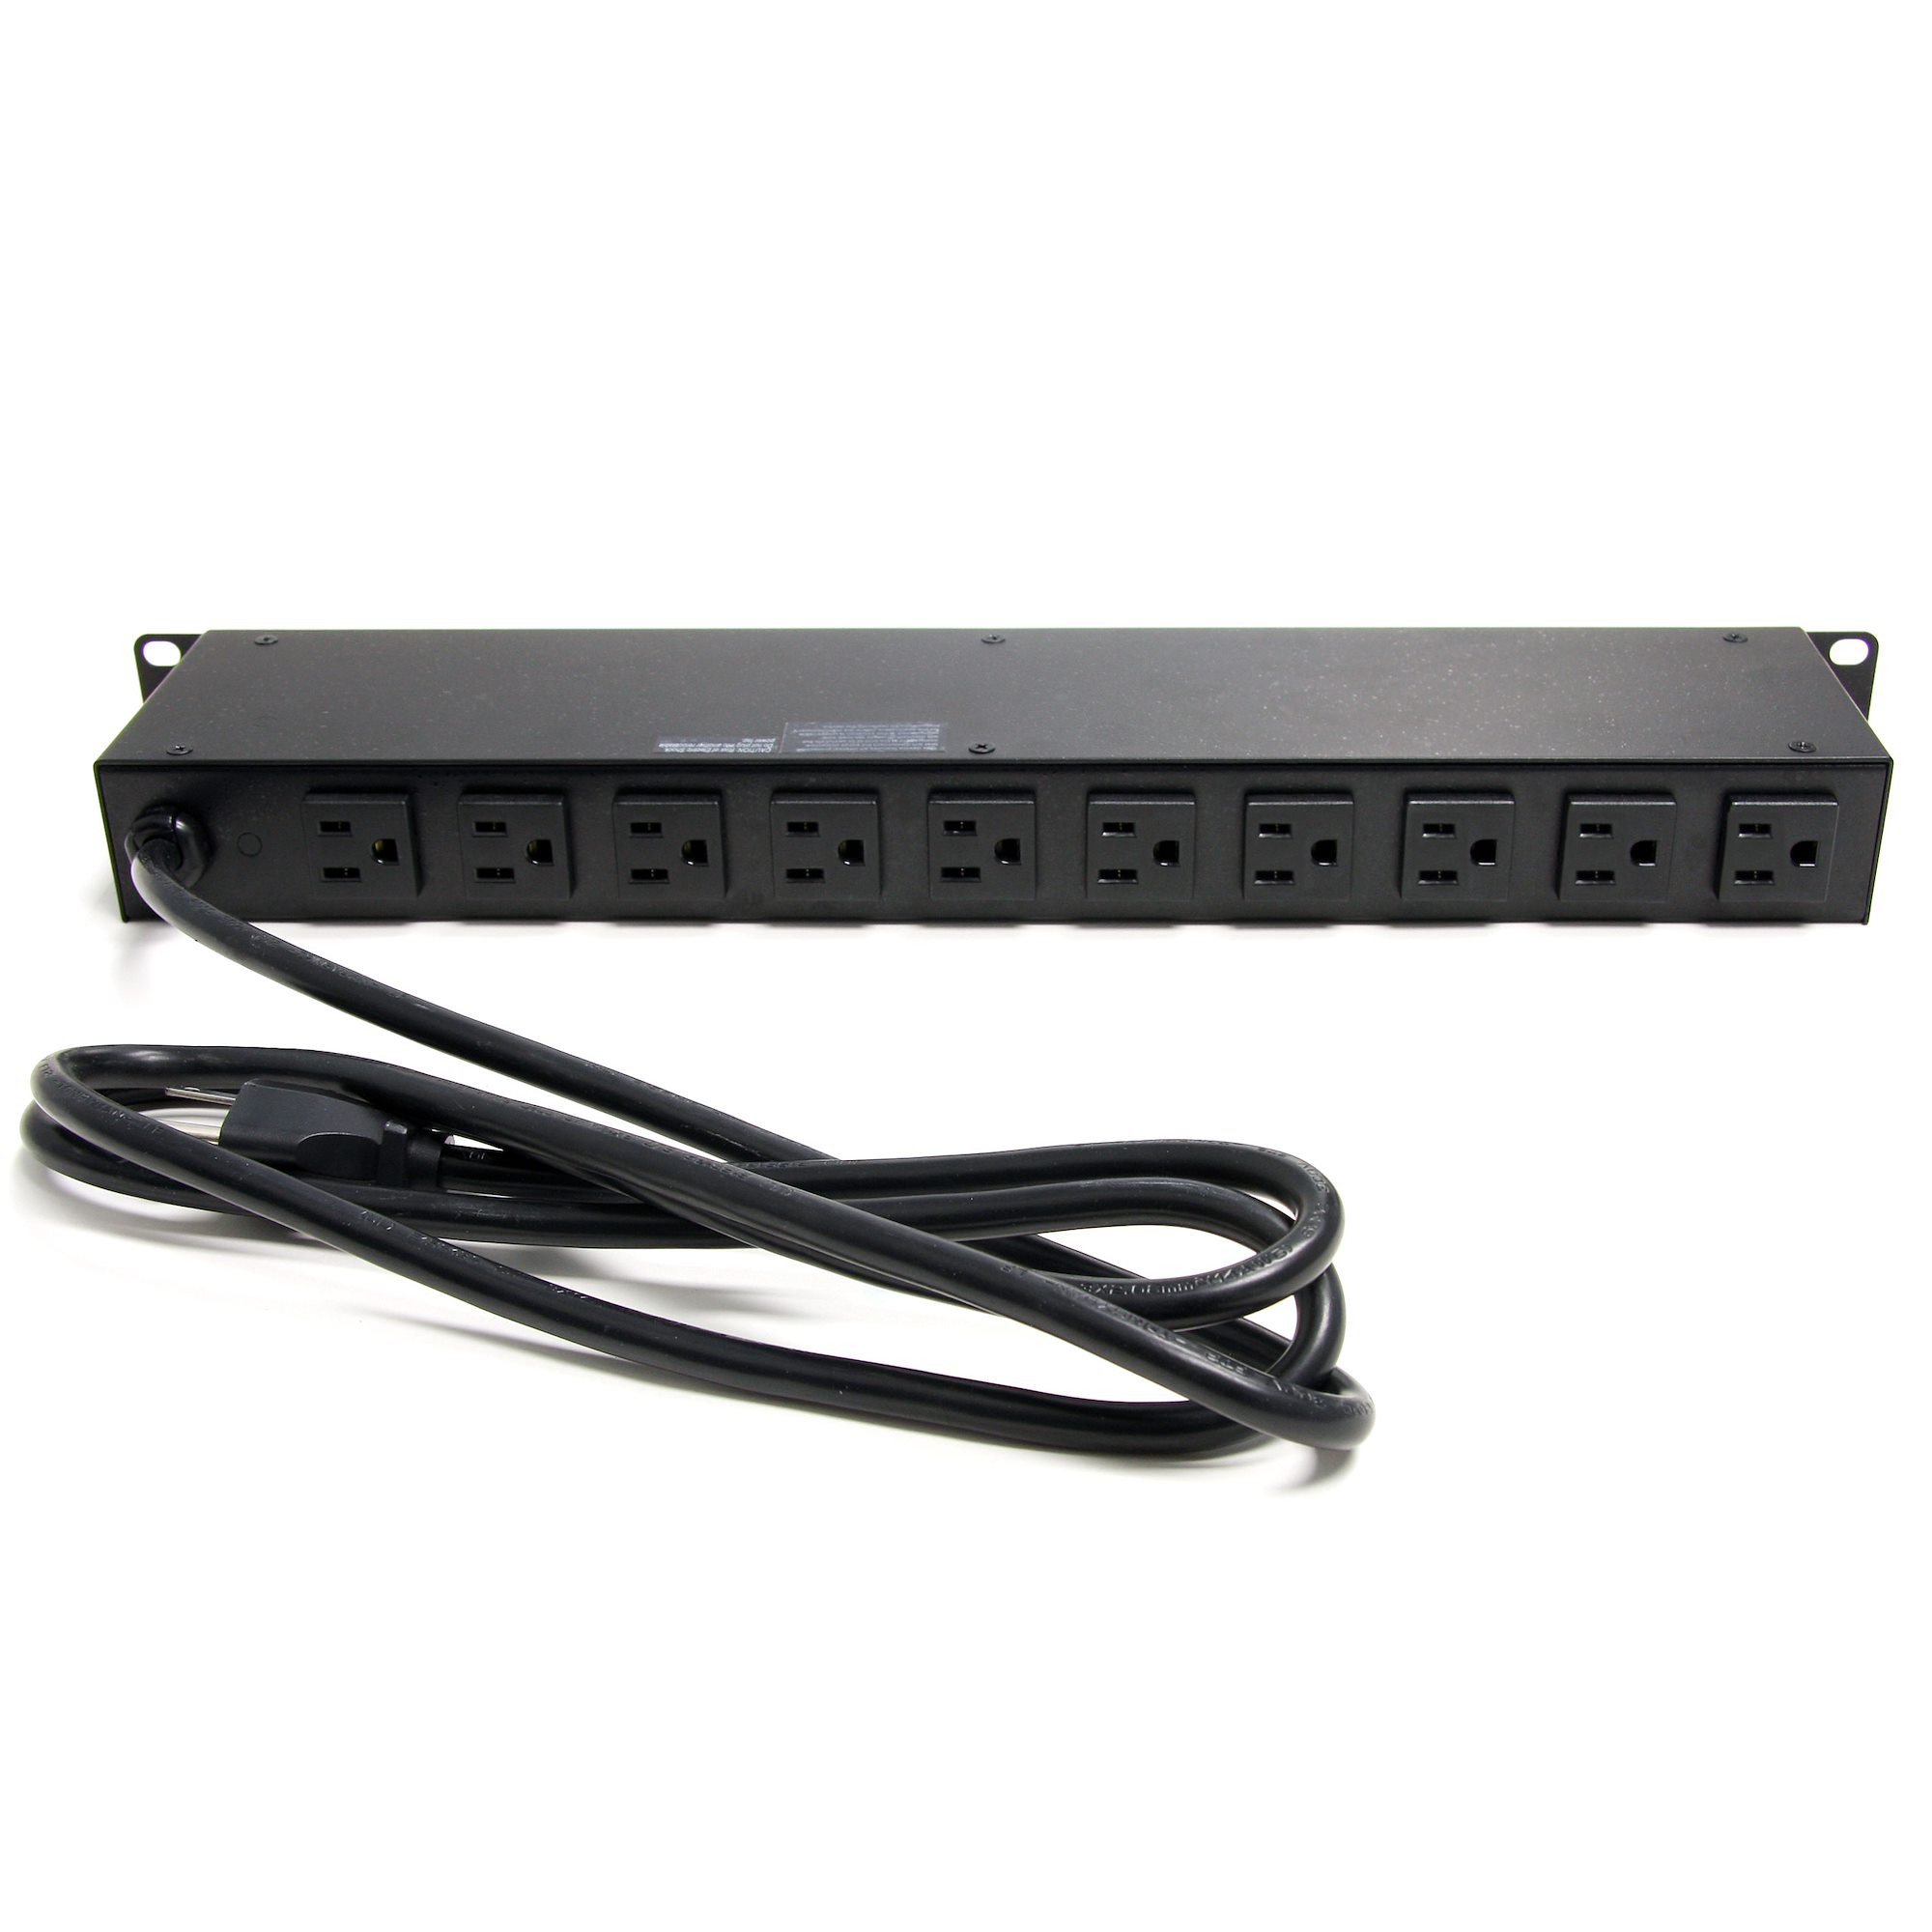 1U/15A/110V Industrial Kungfuking 9 Outlets Power Strip Rack Mount PDU Outlet Strip School and Home Server Rack Mount Electrical Outlet with 6 FT Power Cord for Commercial 